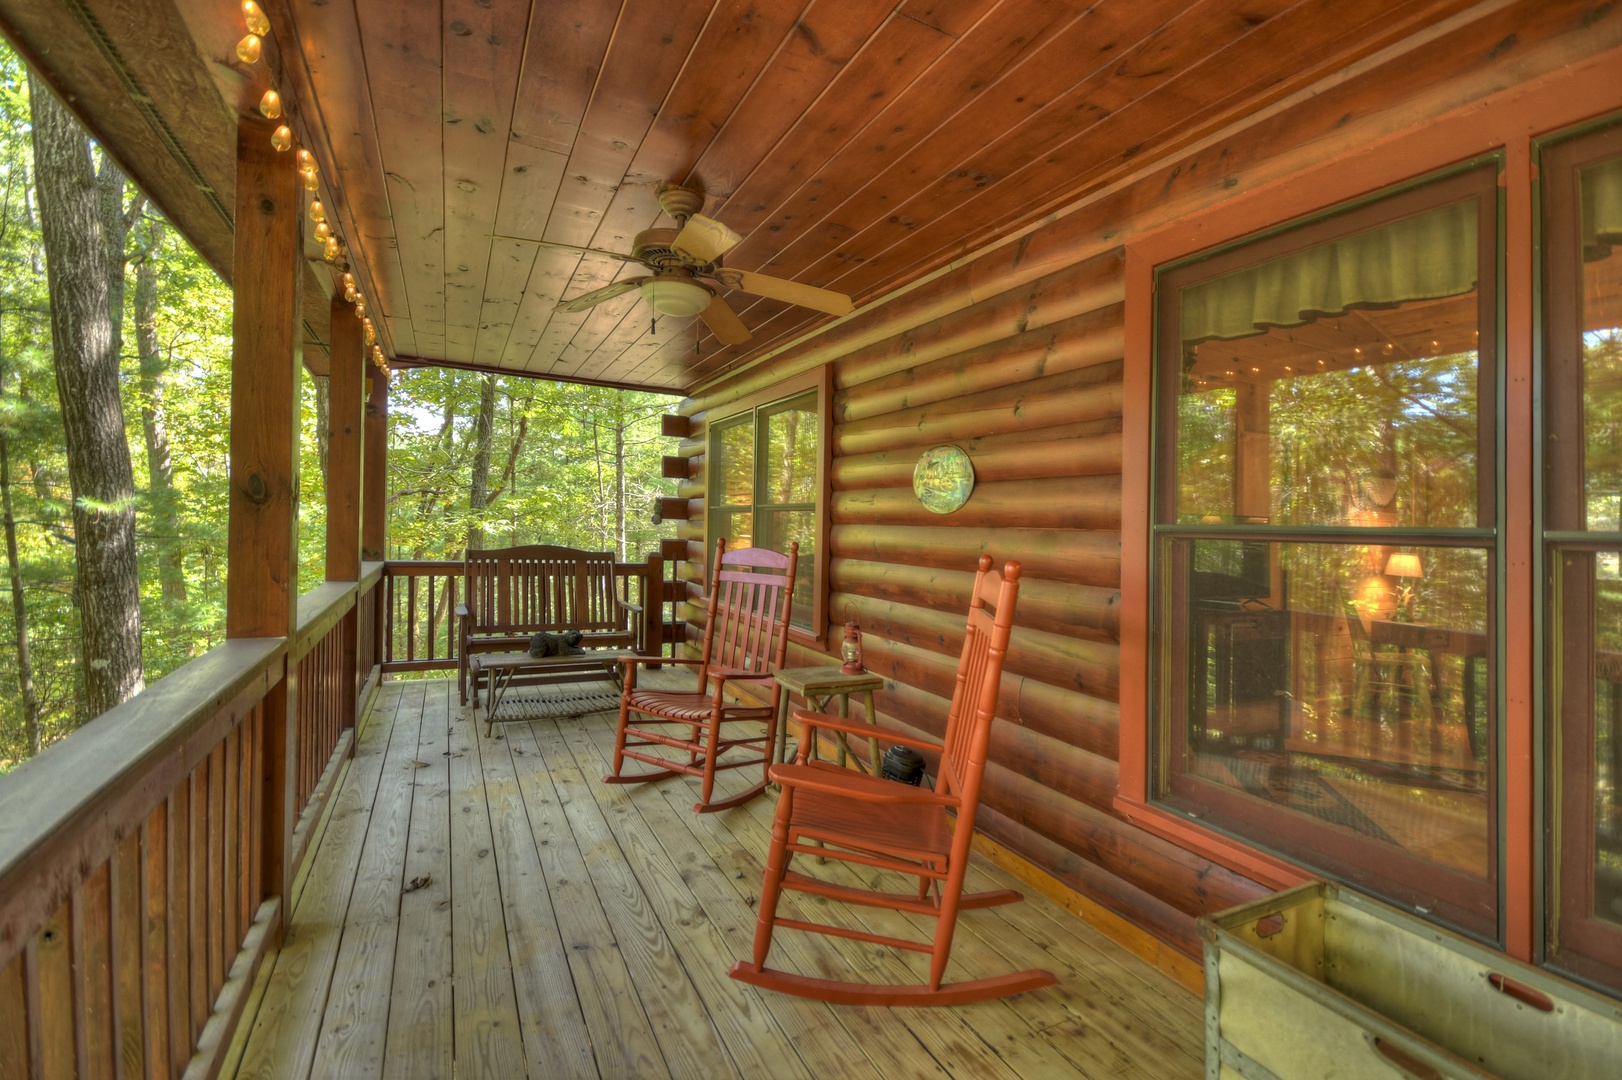 Bear Watch - Deck with Rocking Chairs